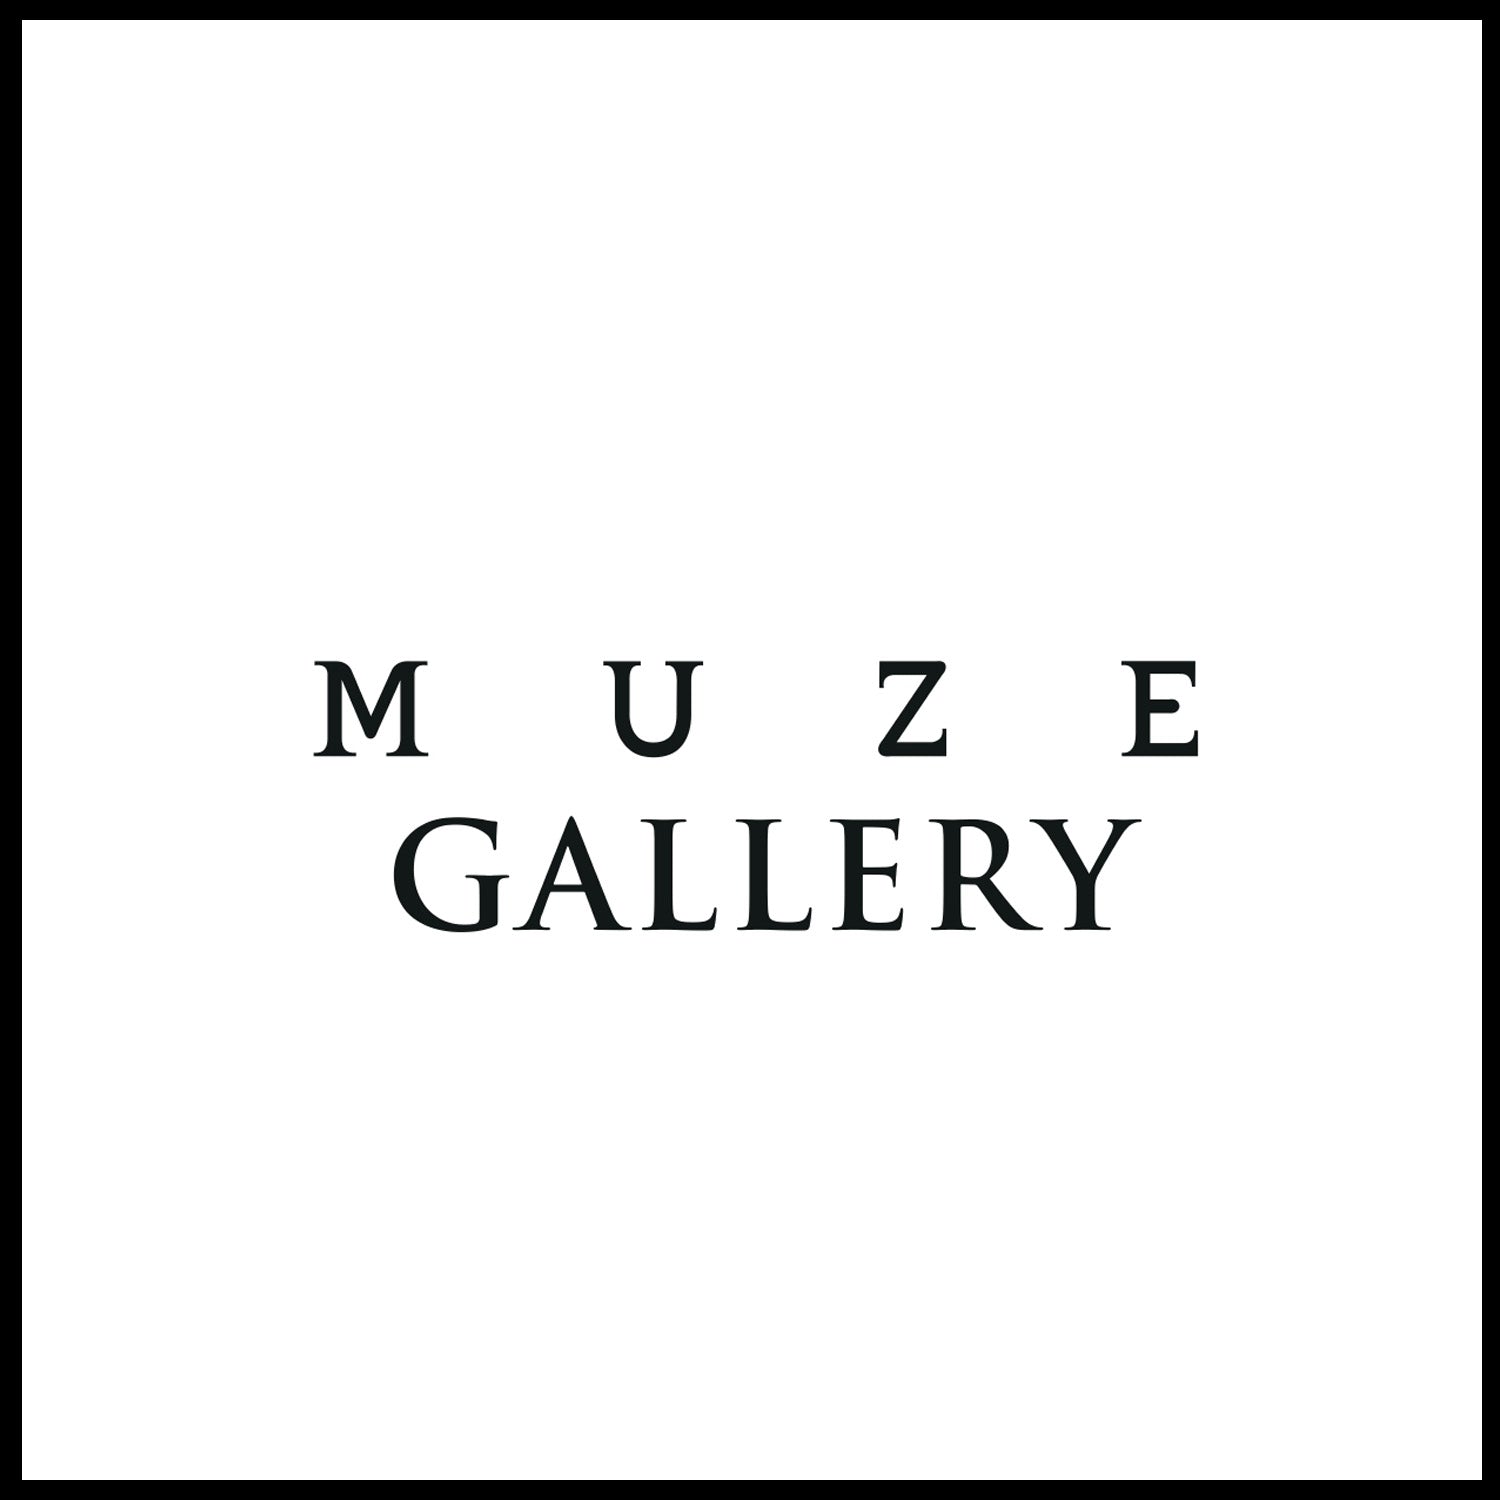 MUZE GALLERY LIMITED ITEM